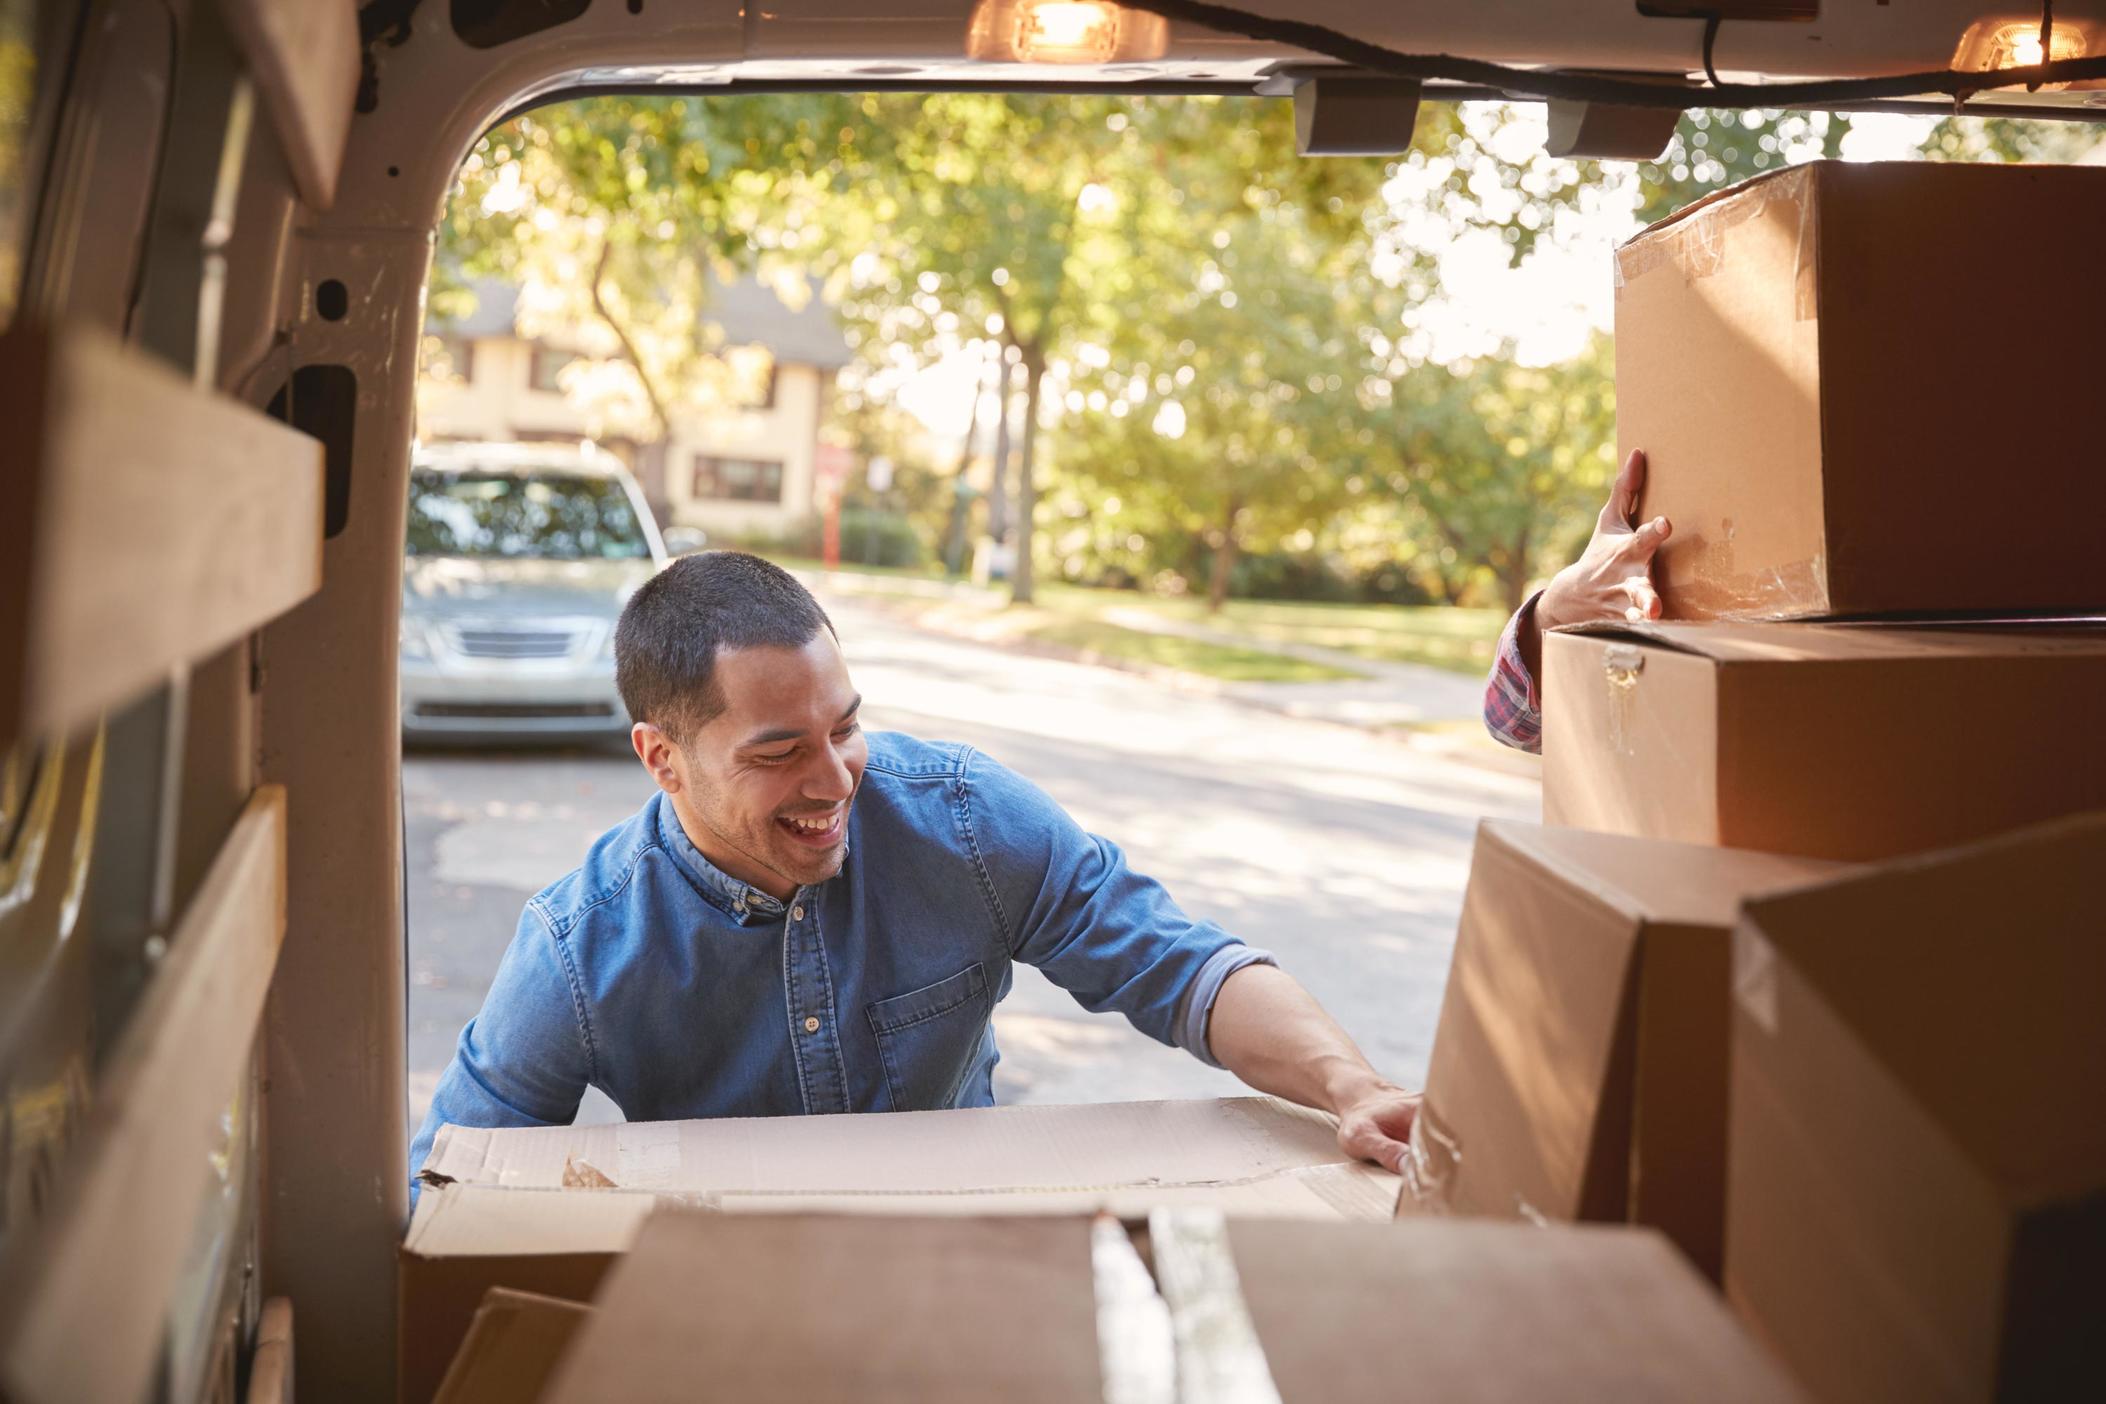 Smiling man removing boxes from back of moving van